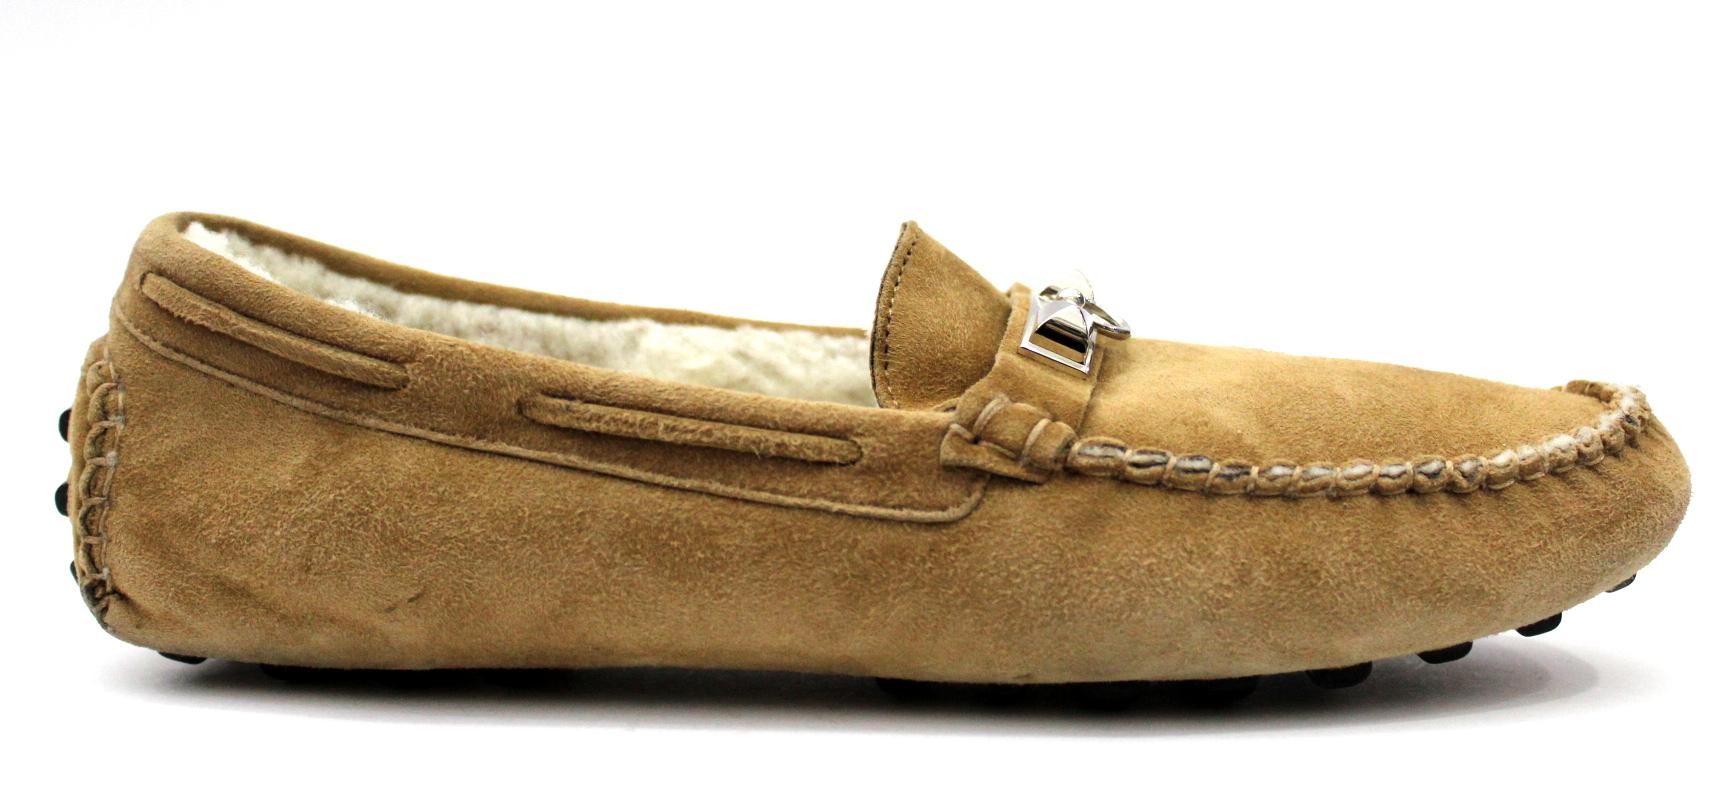 Hermes moccasins in beige suede, lined in wool with silver detail.
Number 40.Good conditions!